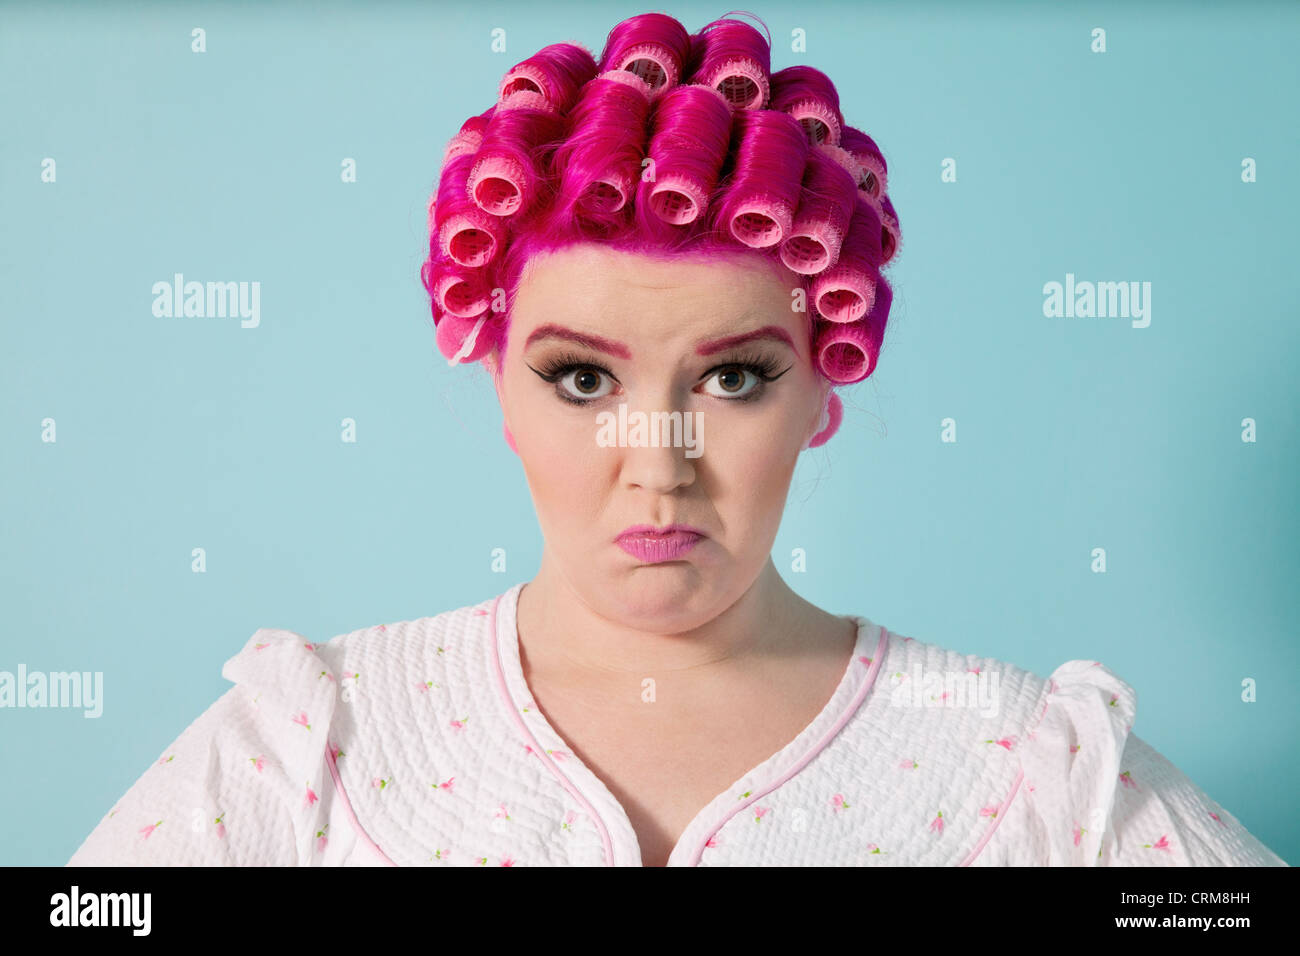 Portrait of young woman grimacing with hair curlers over colored background Stock Photo